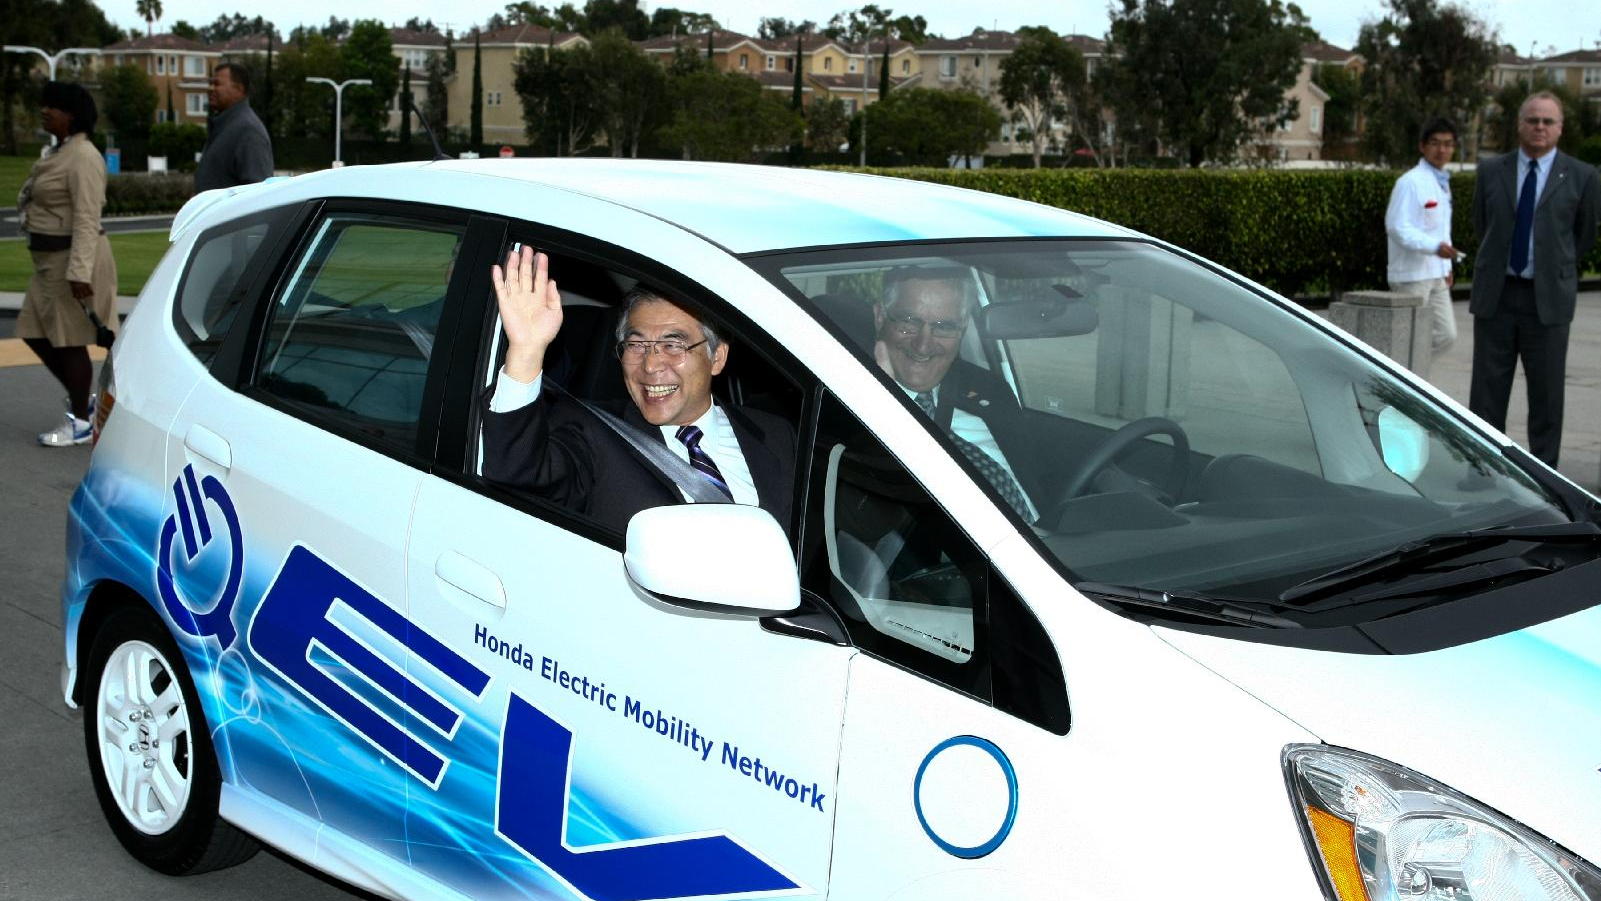 Honda launches Fit EV electric car and Accord plug-in hybrid test program in Torrance, CA, Dec 2010